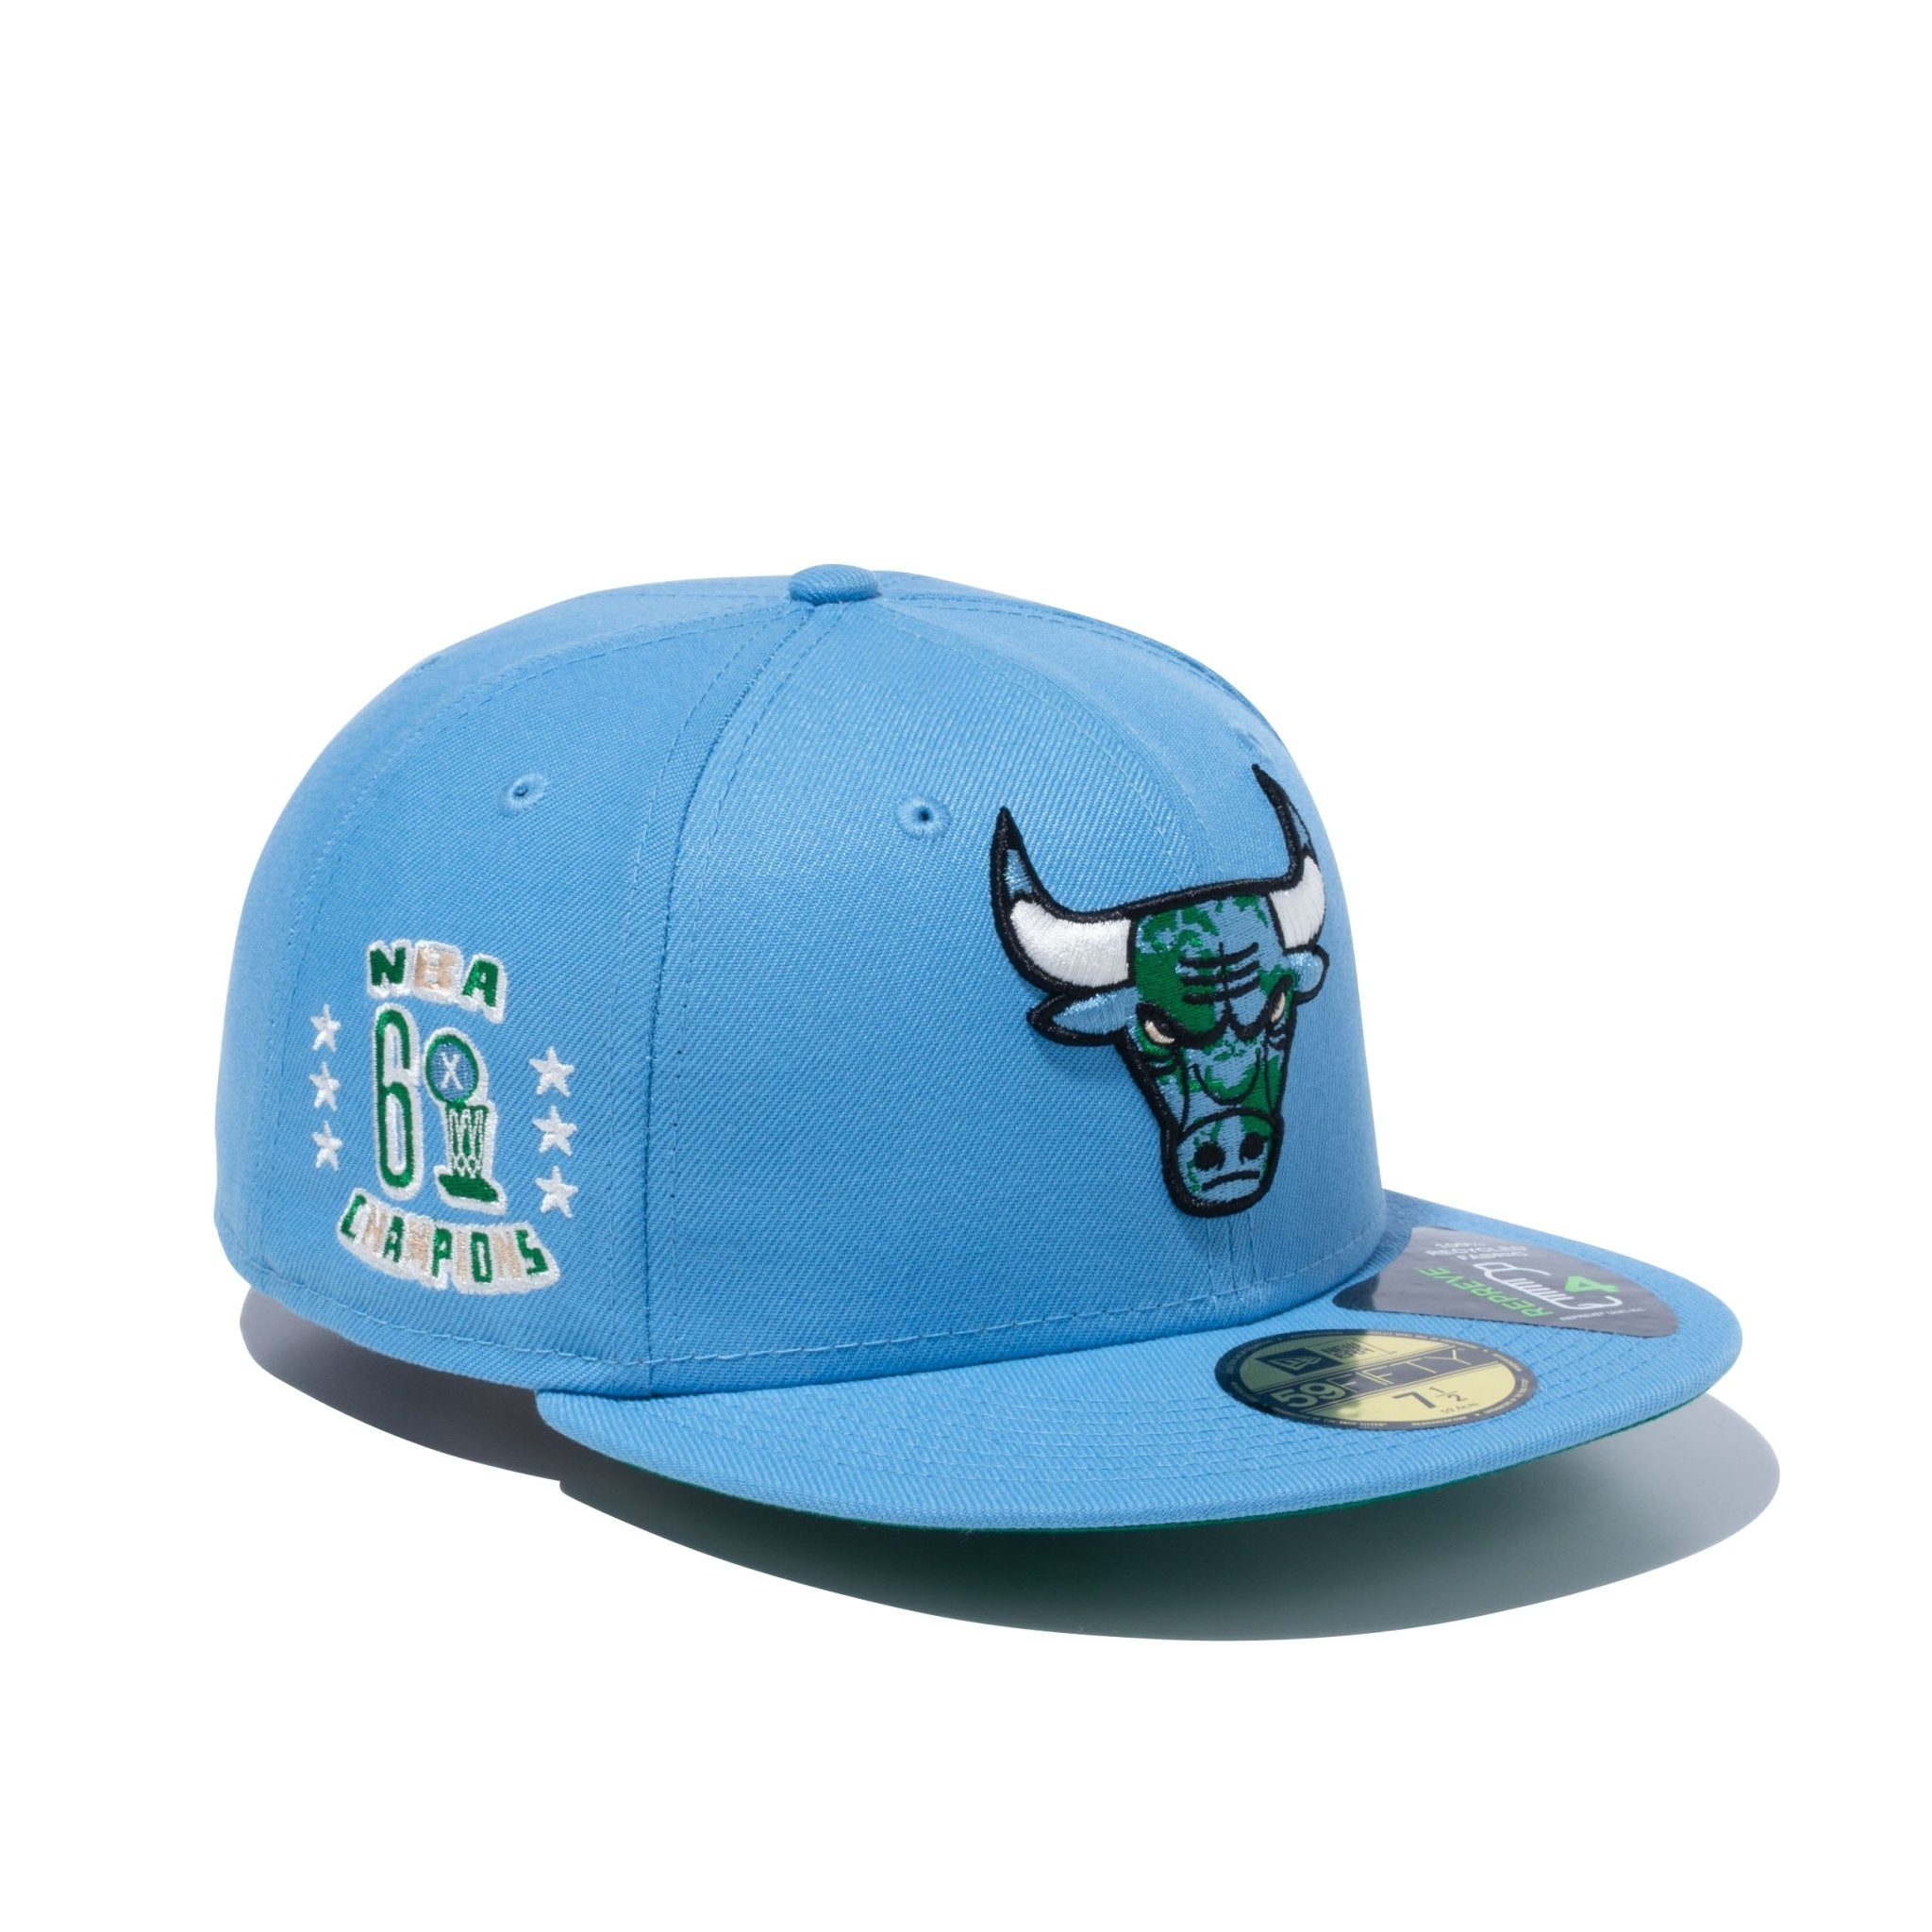 59FIFTY NBA Global シカゴ・ブルズ REPREVE RECYCLED FABRIC